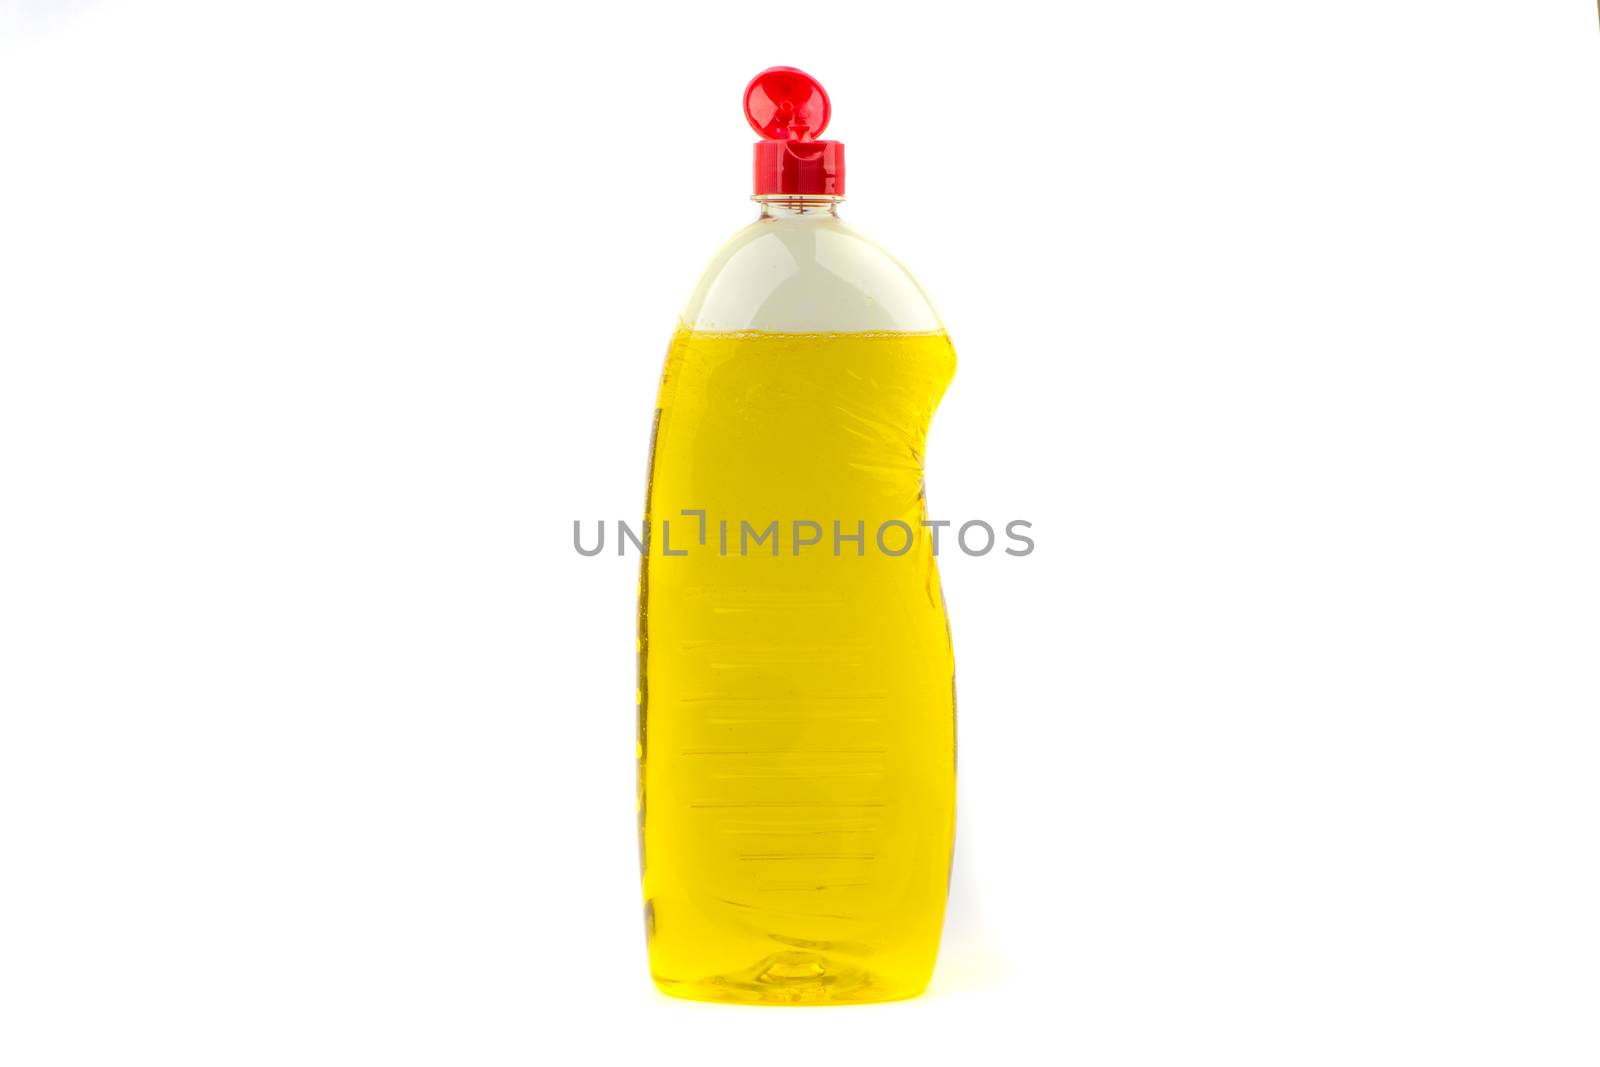 Dishwashing liquid detergent or soap in plastic bottle isolated on white background by silverwings